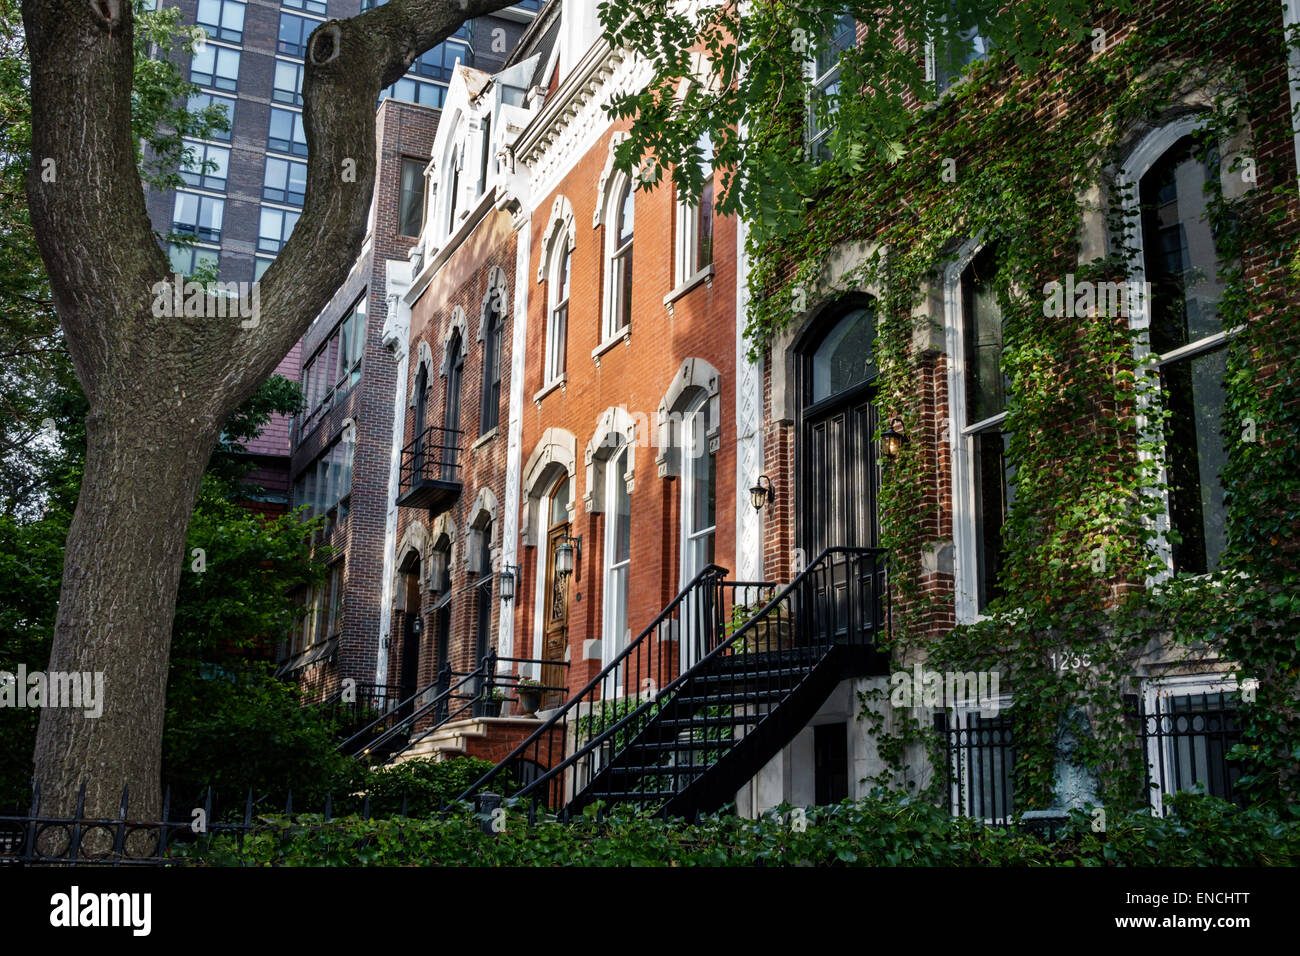 Chicago Illinois,Gold Coast Historic District,North Dearborn Parkway,neighborhood,townhouse,town house,housing,brownstone,facade,door,stair,ivy,tree,t Stock Photo